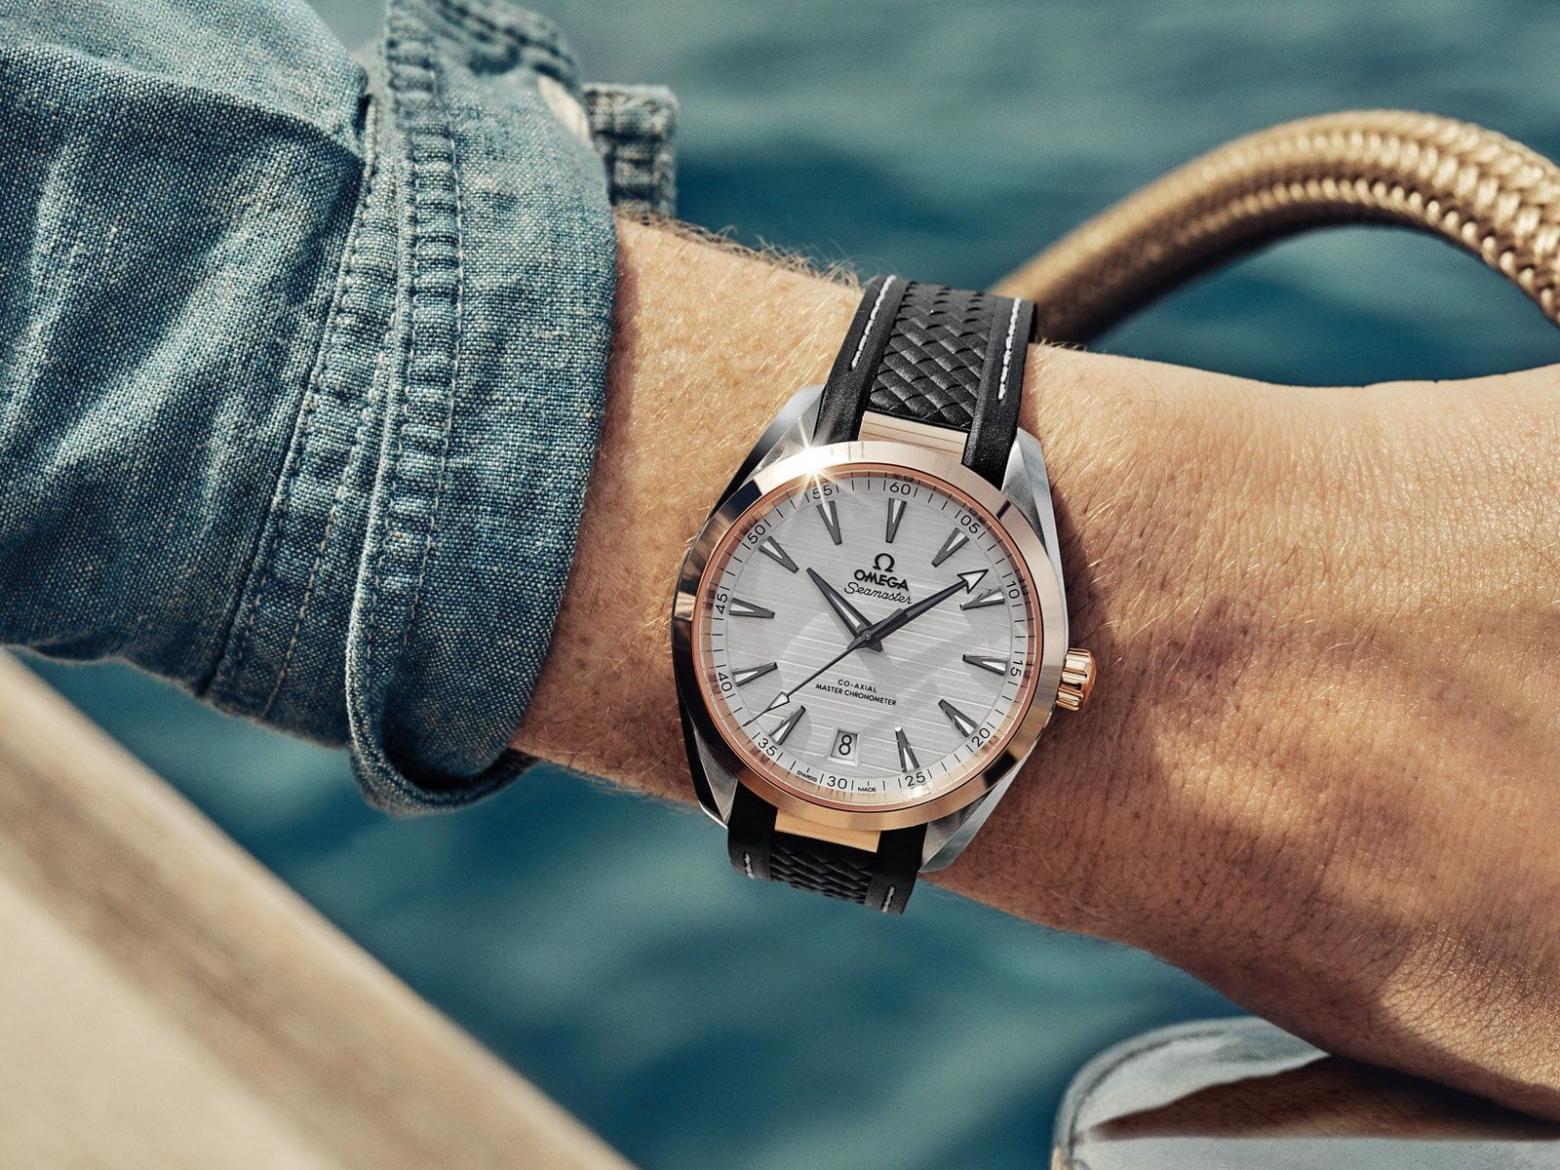 Up Close with the Versatile Omega Seamaster Aqua Terra Watches